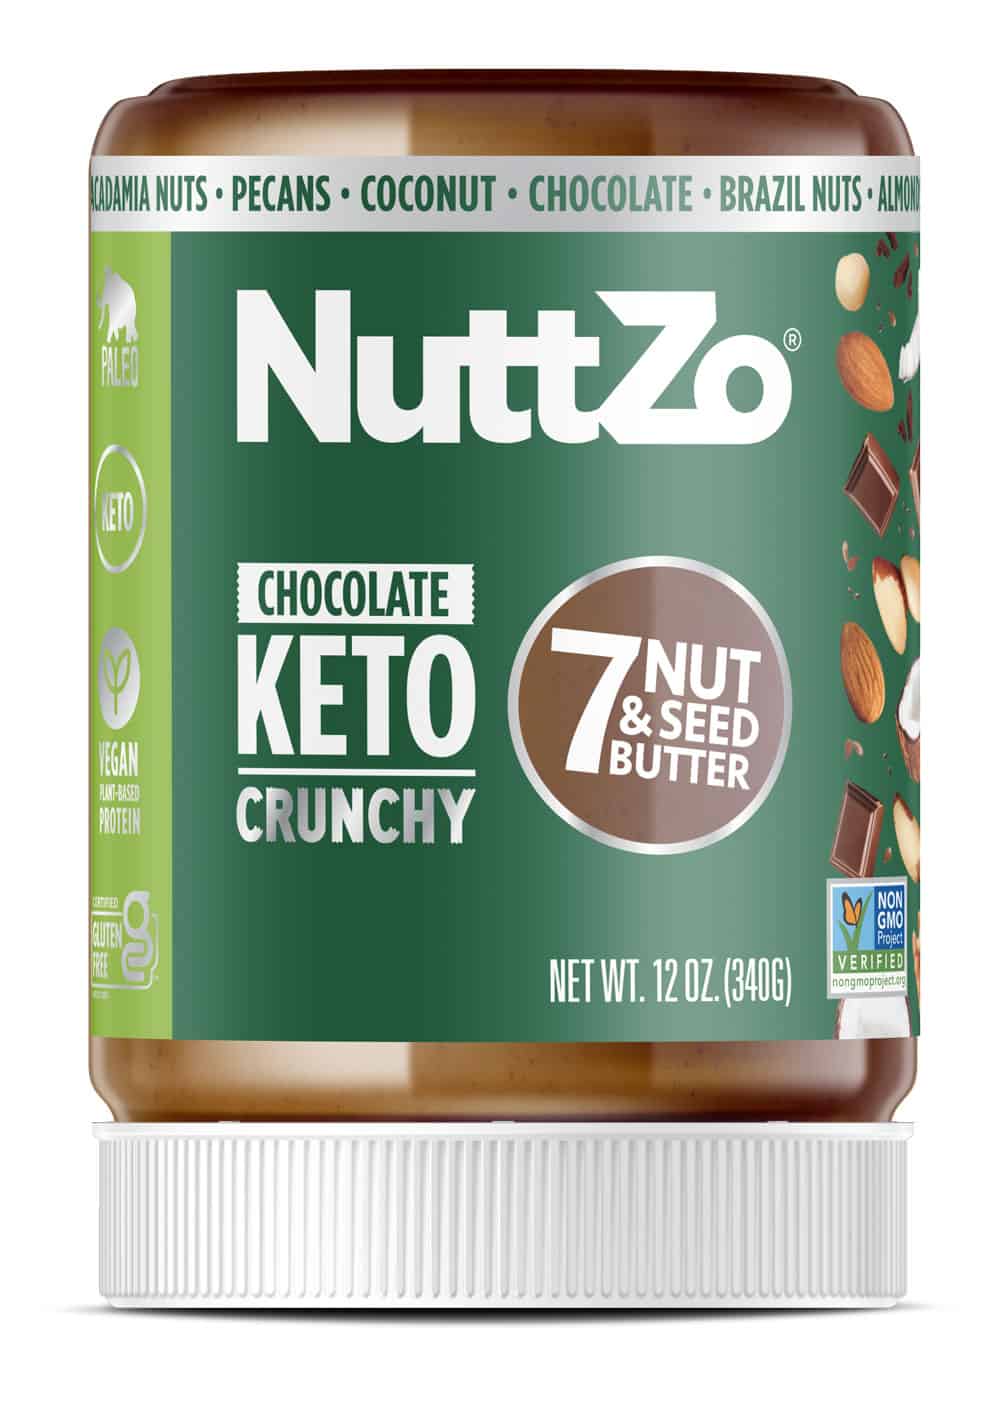 Nuttzo Chocolate Keto, Mixed Nut & Seed Butter - Crunchy 6 units per case 12.0 oz